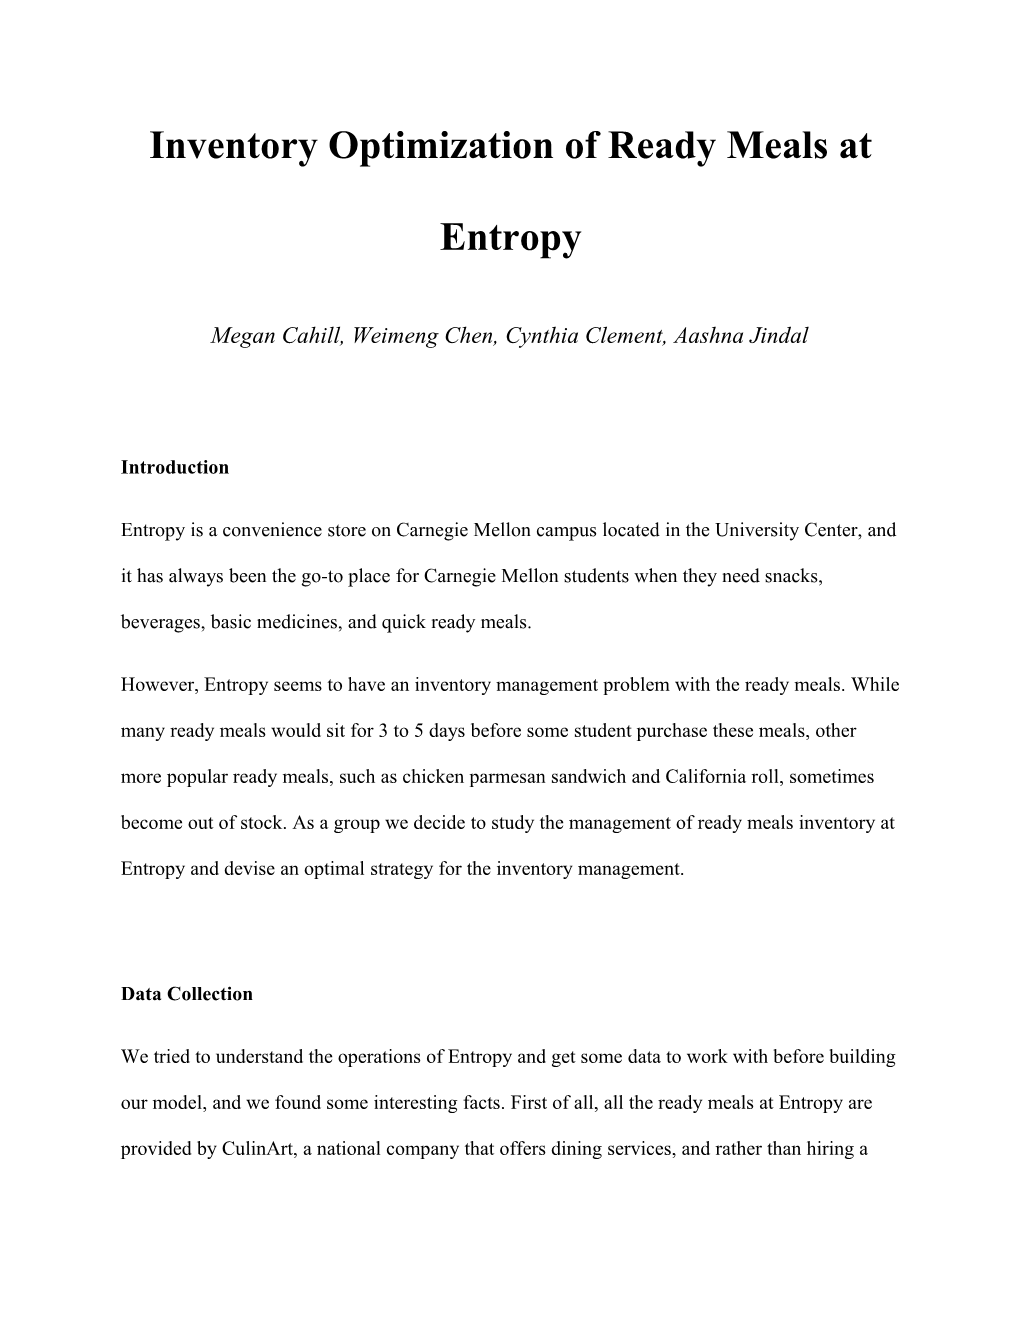 Inventory Optimization of Ready Meals at Entropy